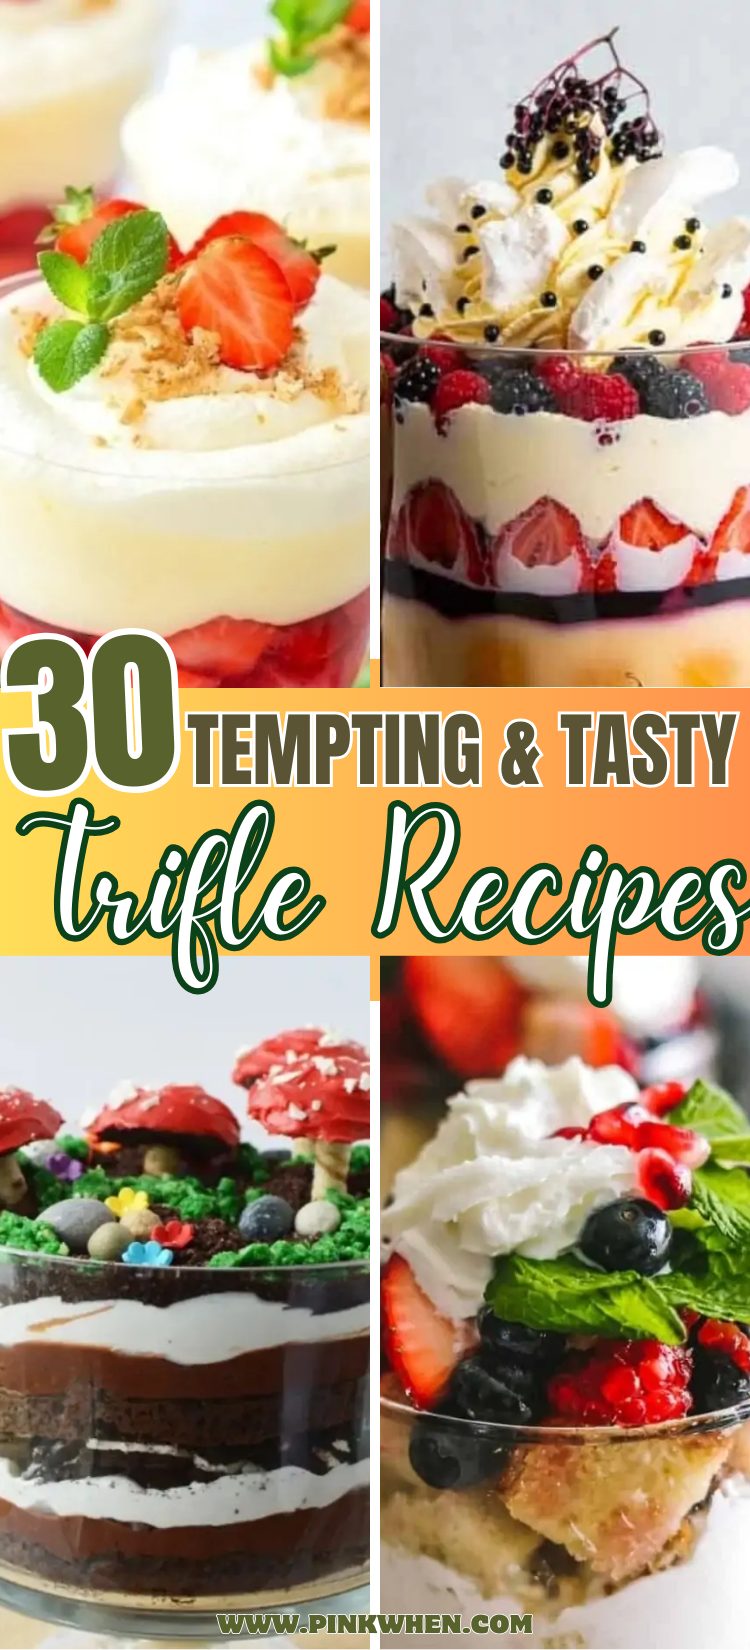 30 Tempting and Tasty Trifle Recipes for Any Occasion